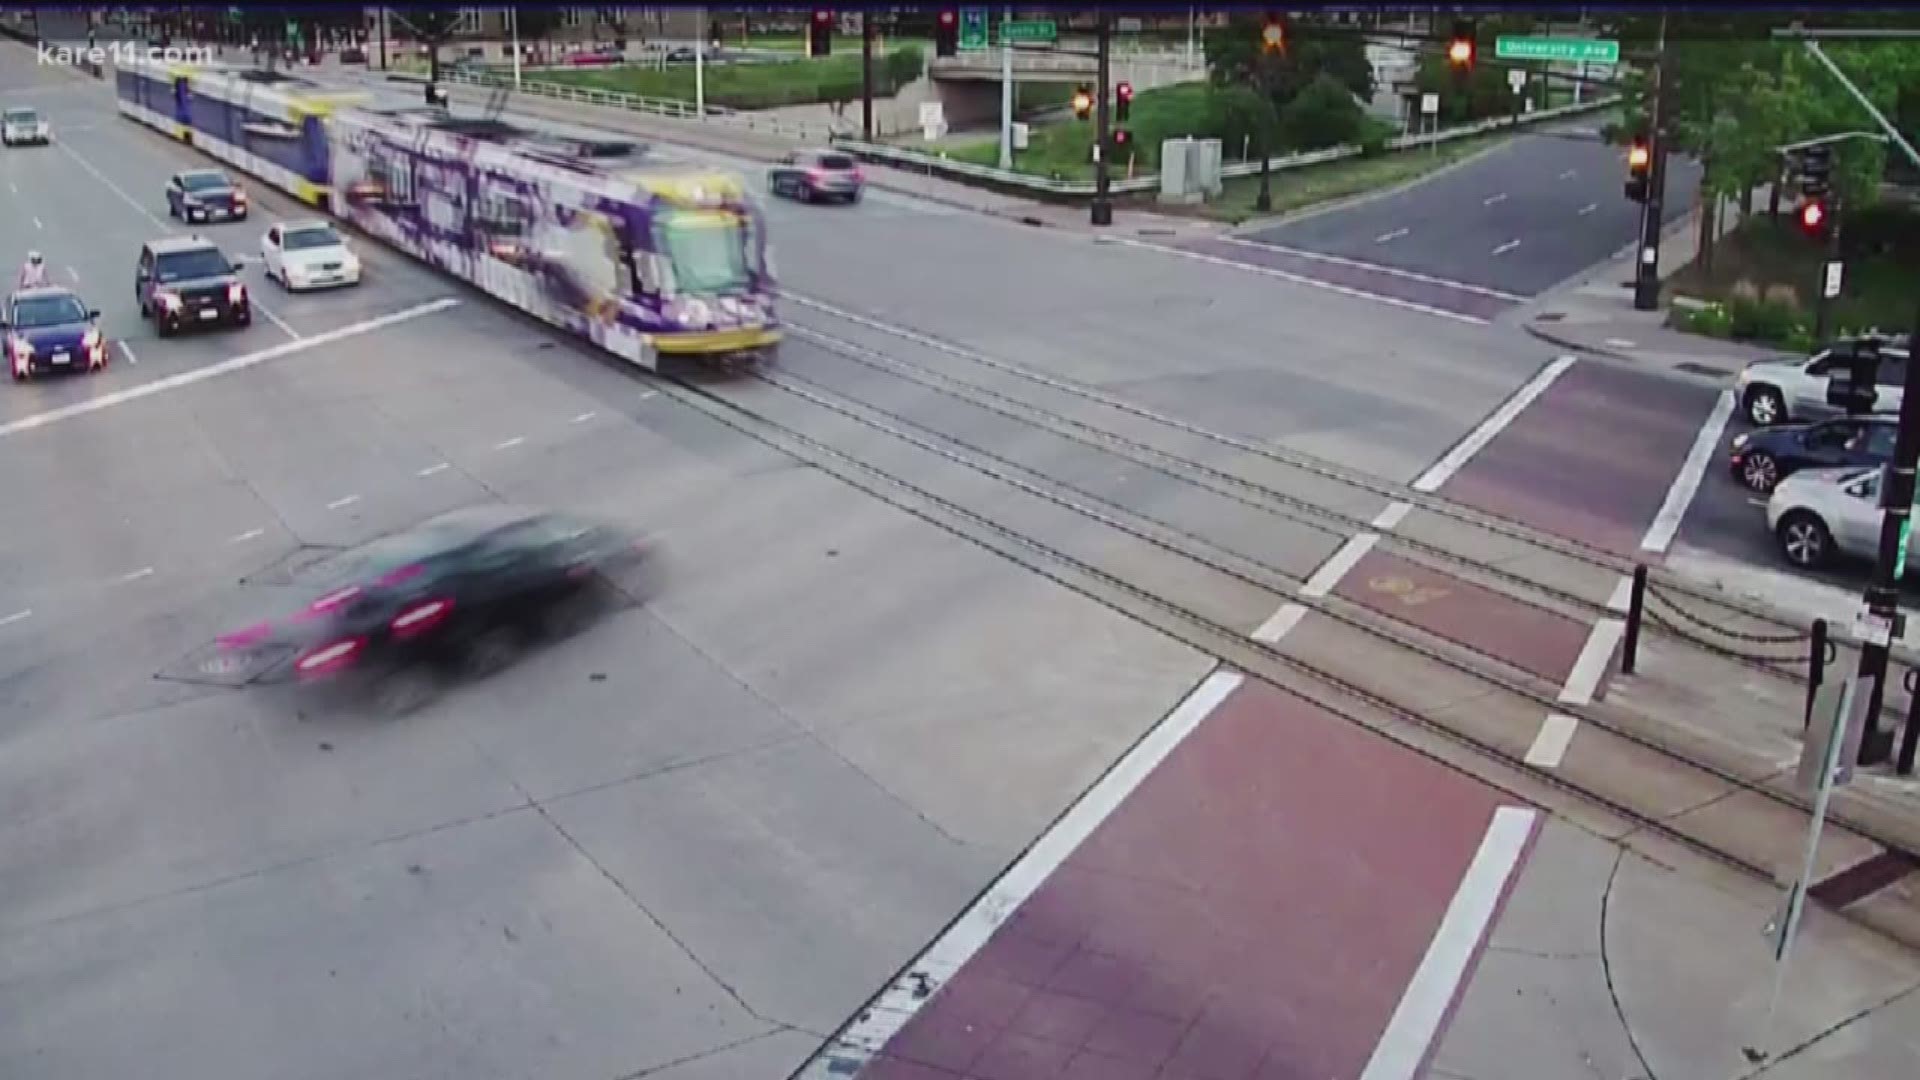 Video obtained by KARE 11 shows a light rail operator disregarded signals to stop leading to a fatal crash. However, prosecutors say they cannot charge him. https://kare11.tv/2RHNYPq